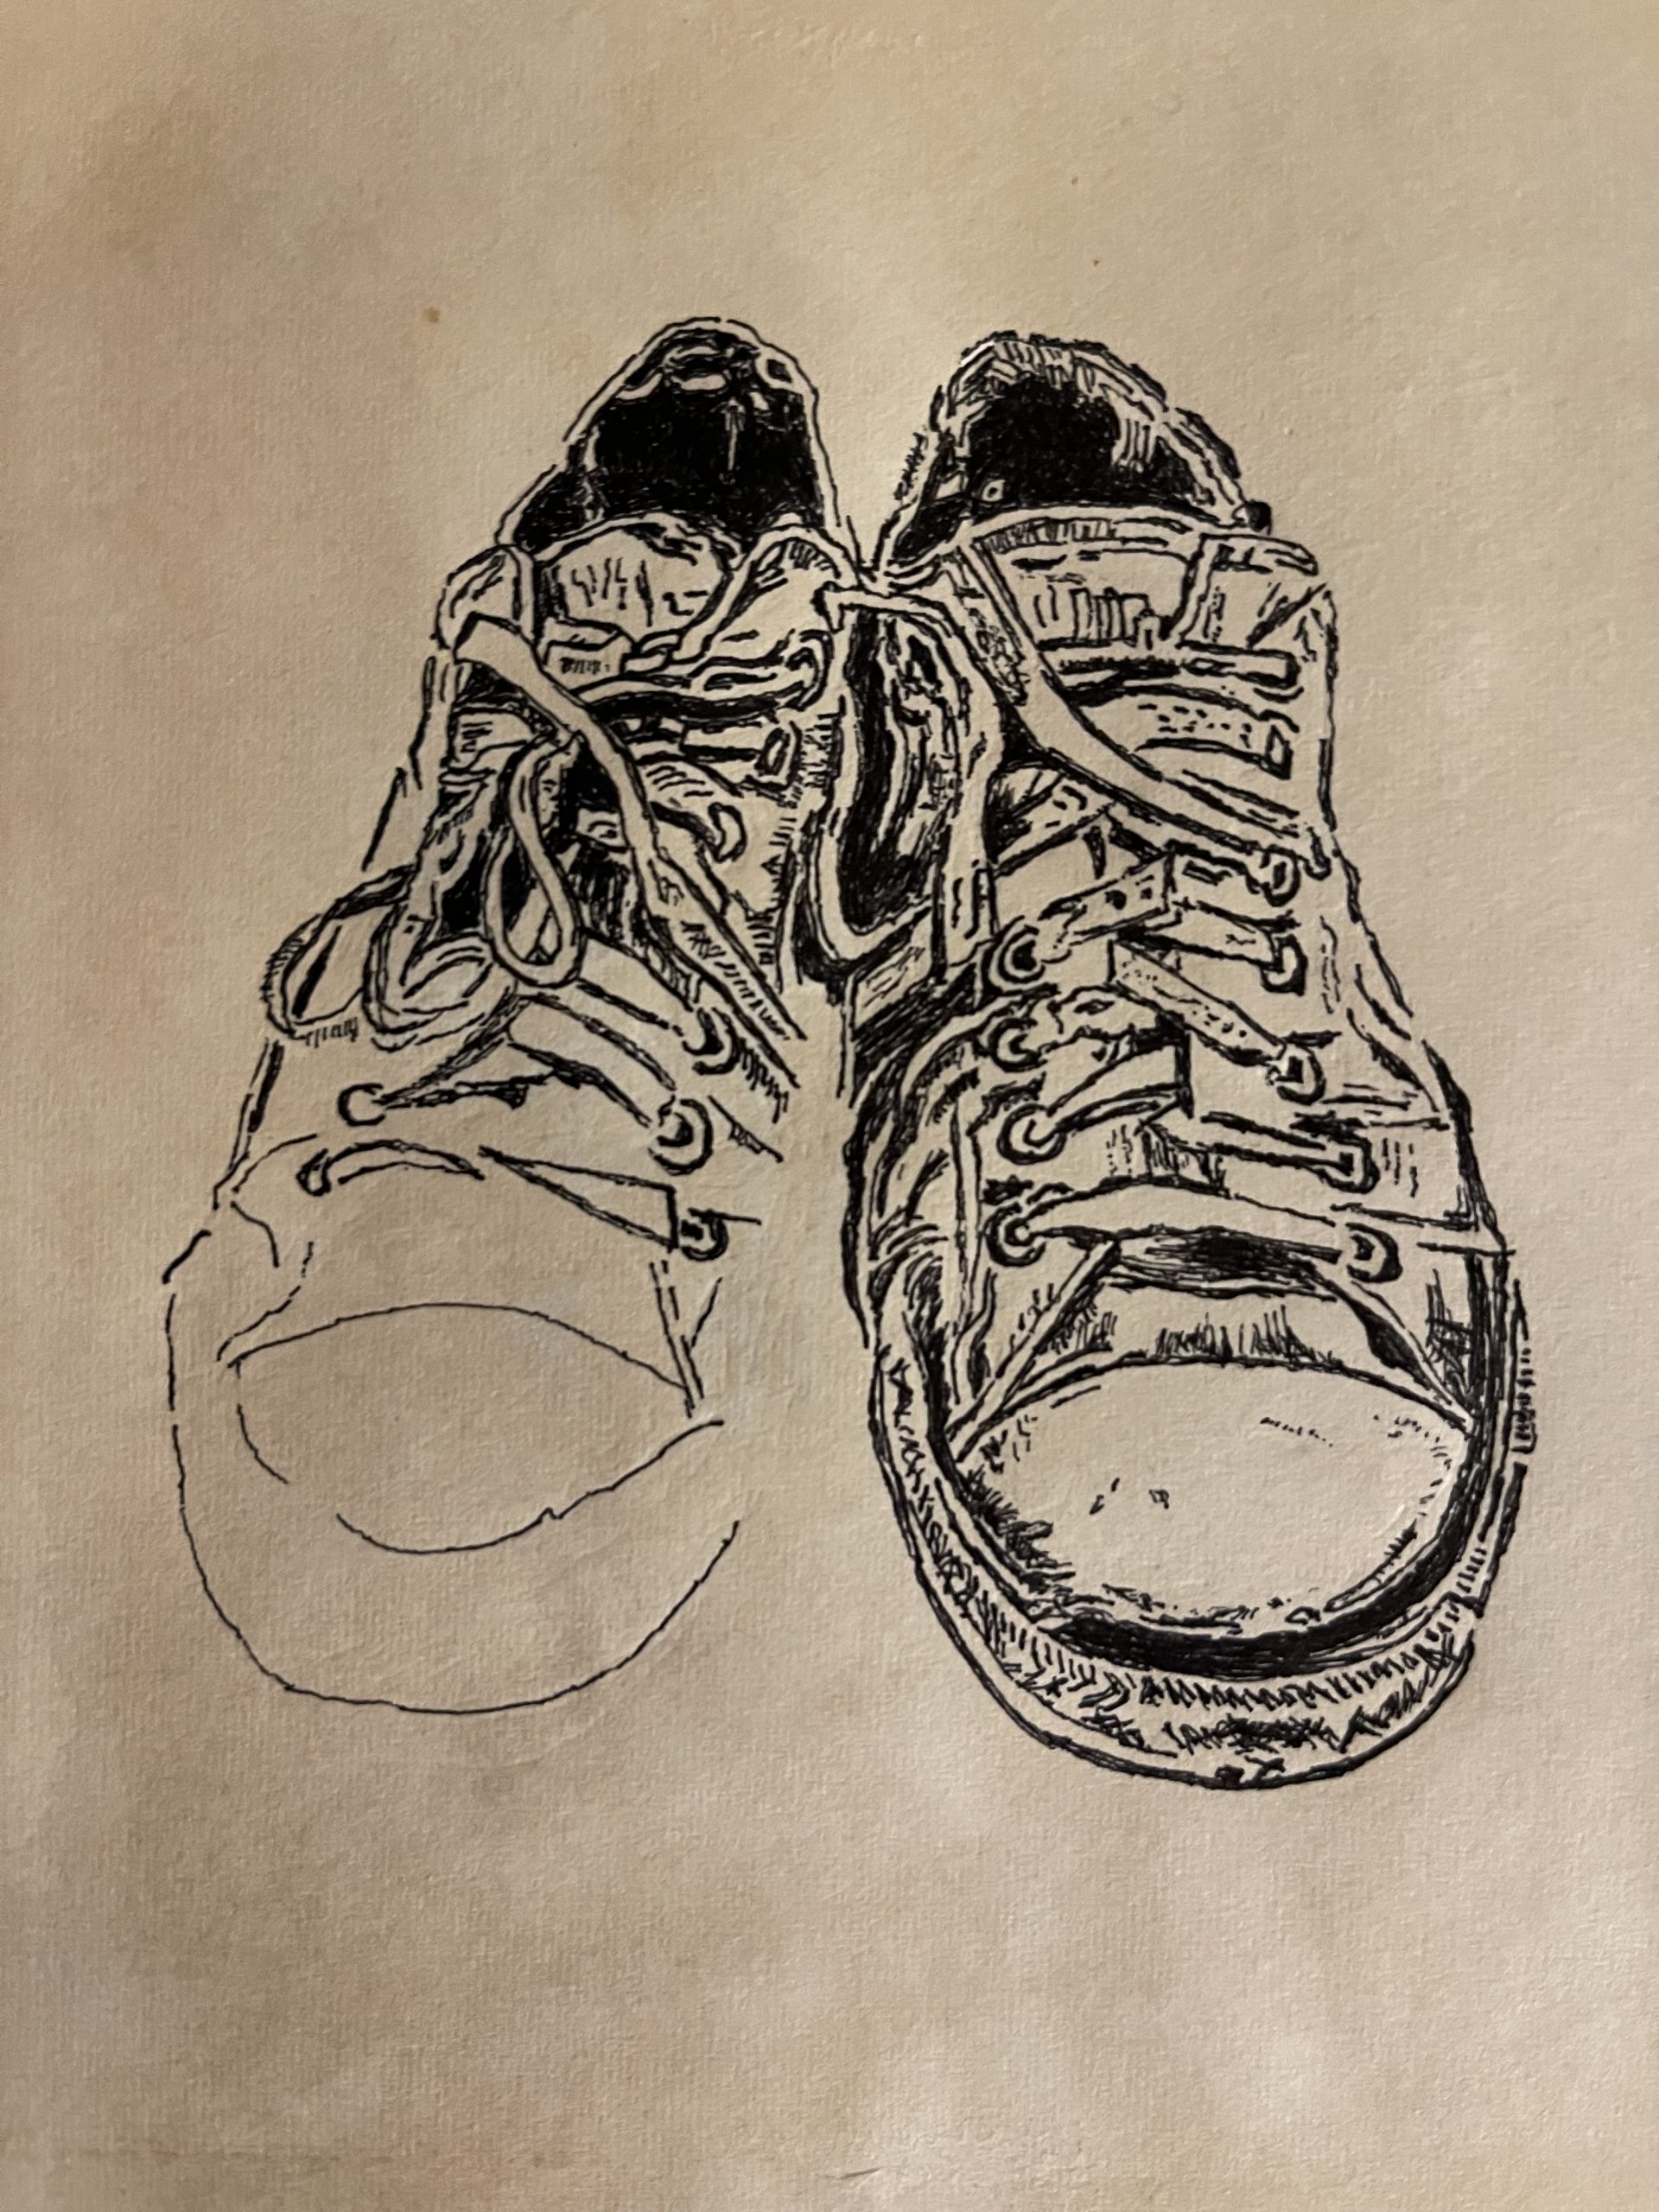 running shoes, study sketch